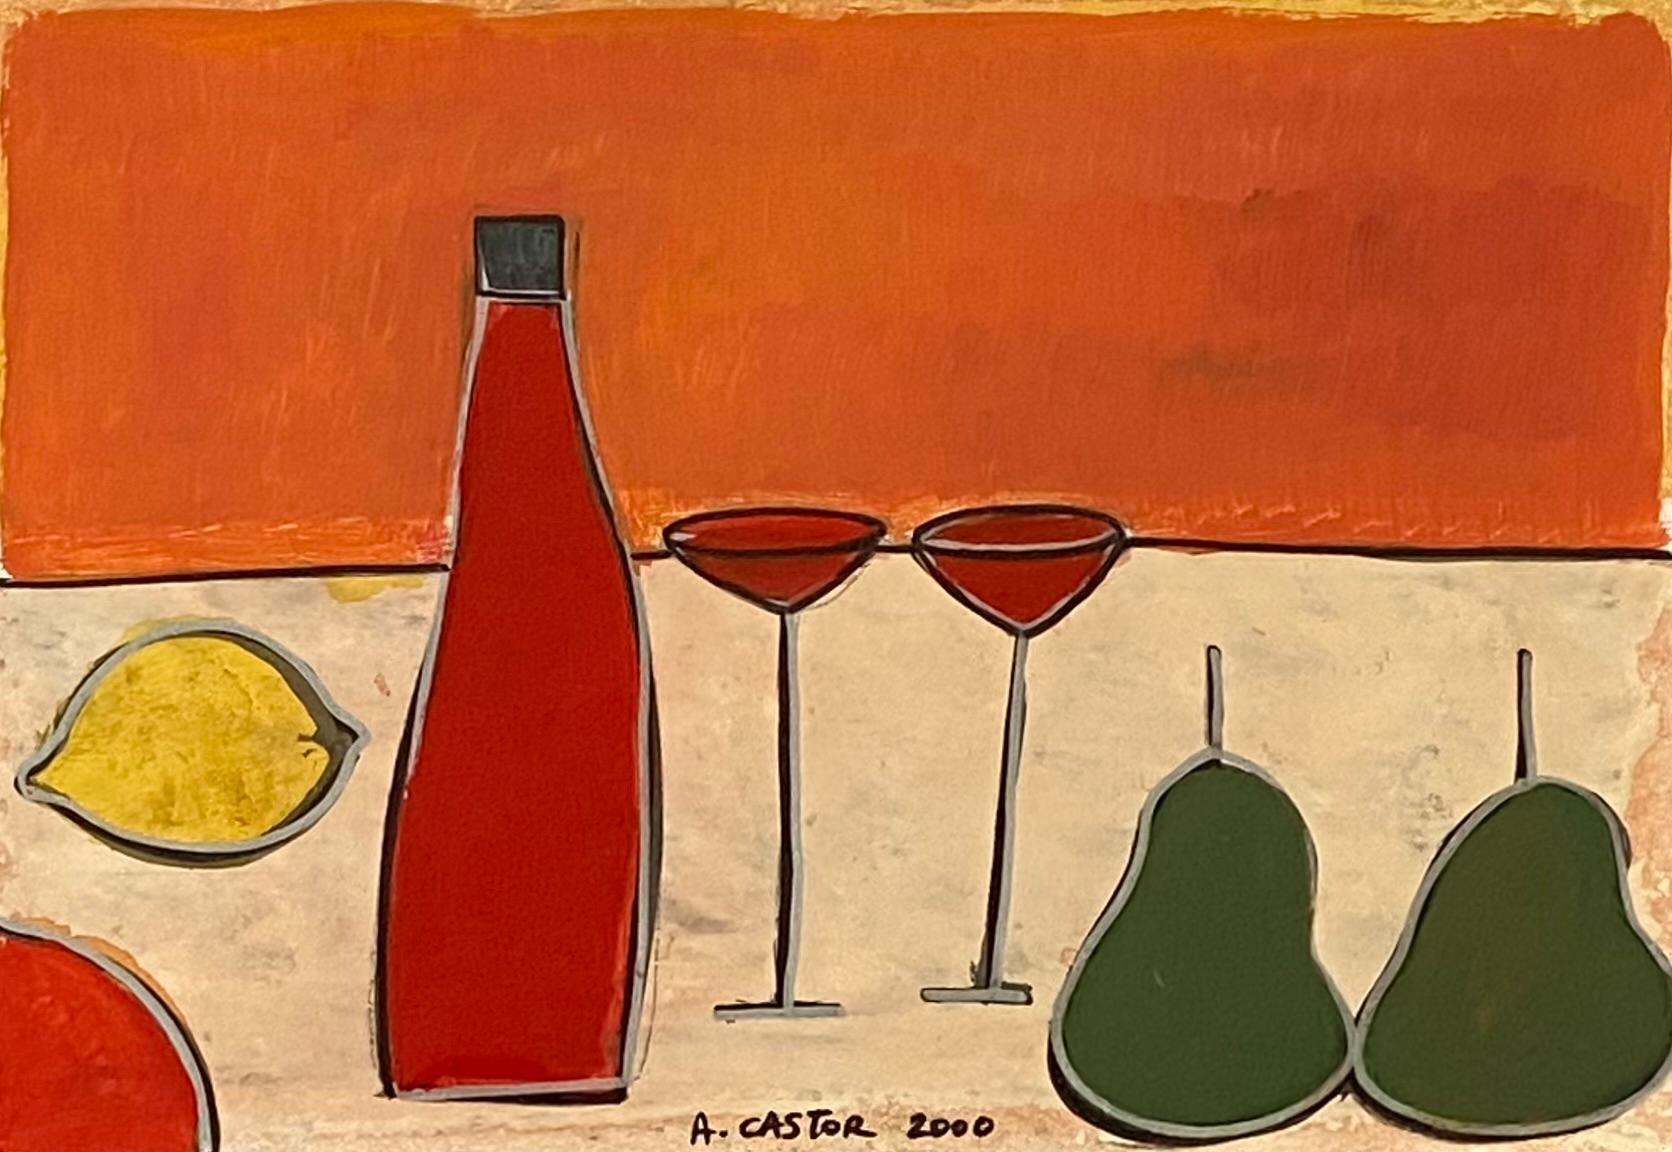 
Original acrylic on light archival cardstock of a contemporary still life by the Spanish artist, Antonio Castro.  Signed bottom middle “A Castor” and dated 2000.  Excellent condition and nicely gallery framed with a marblized mat and a 1.75 inch